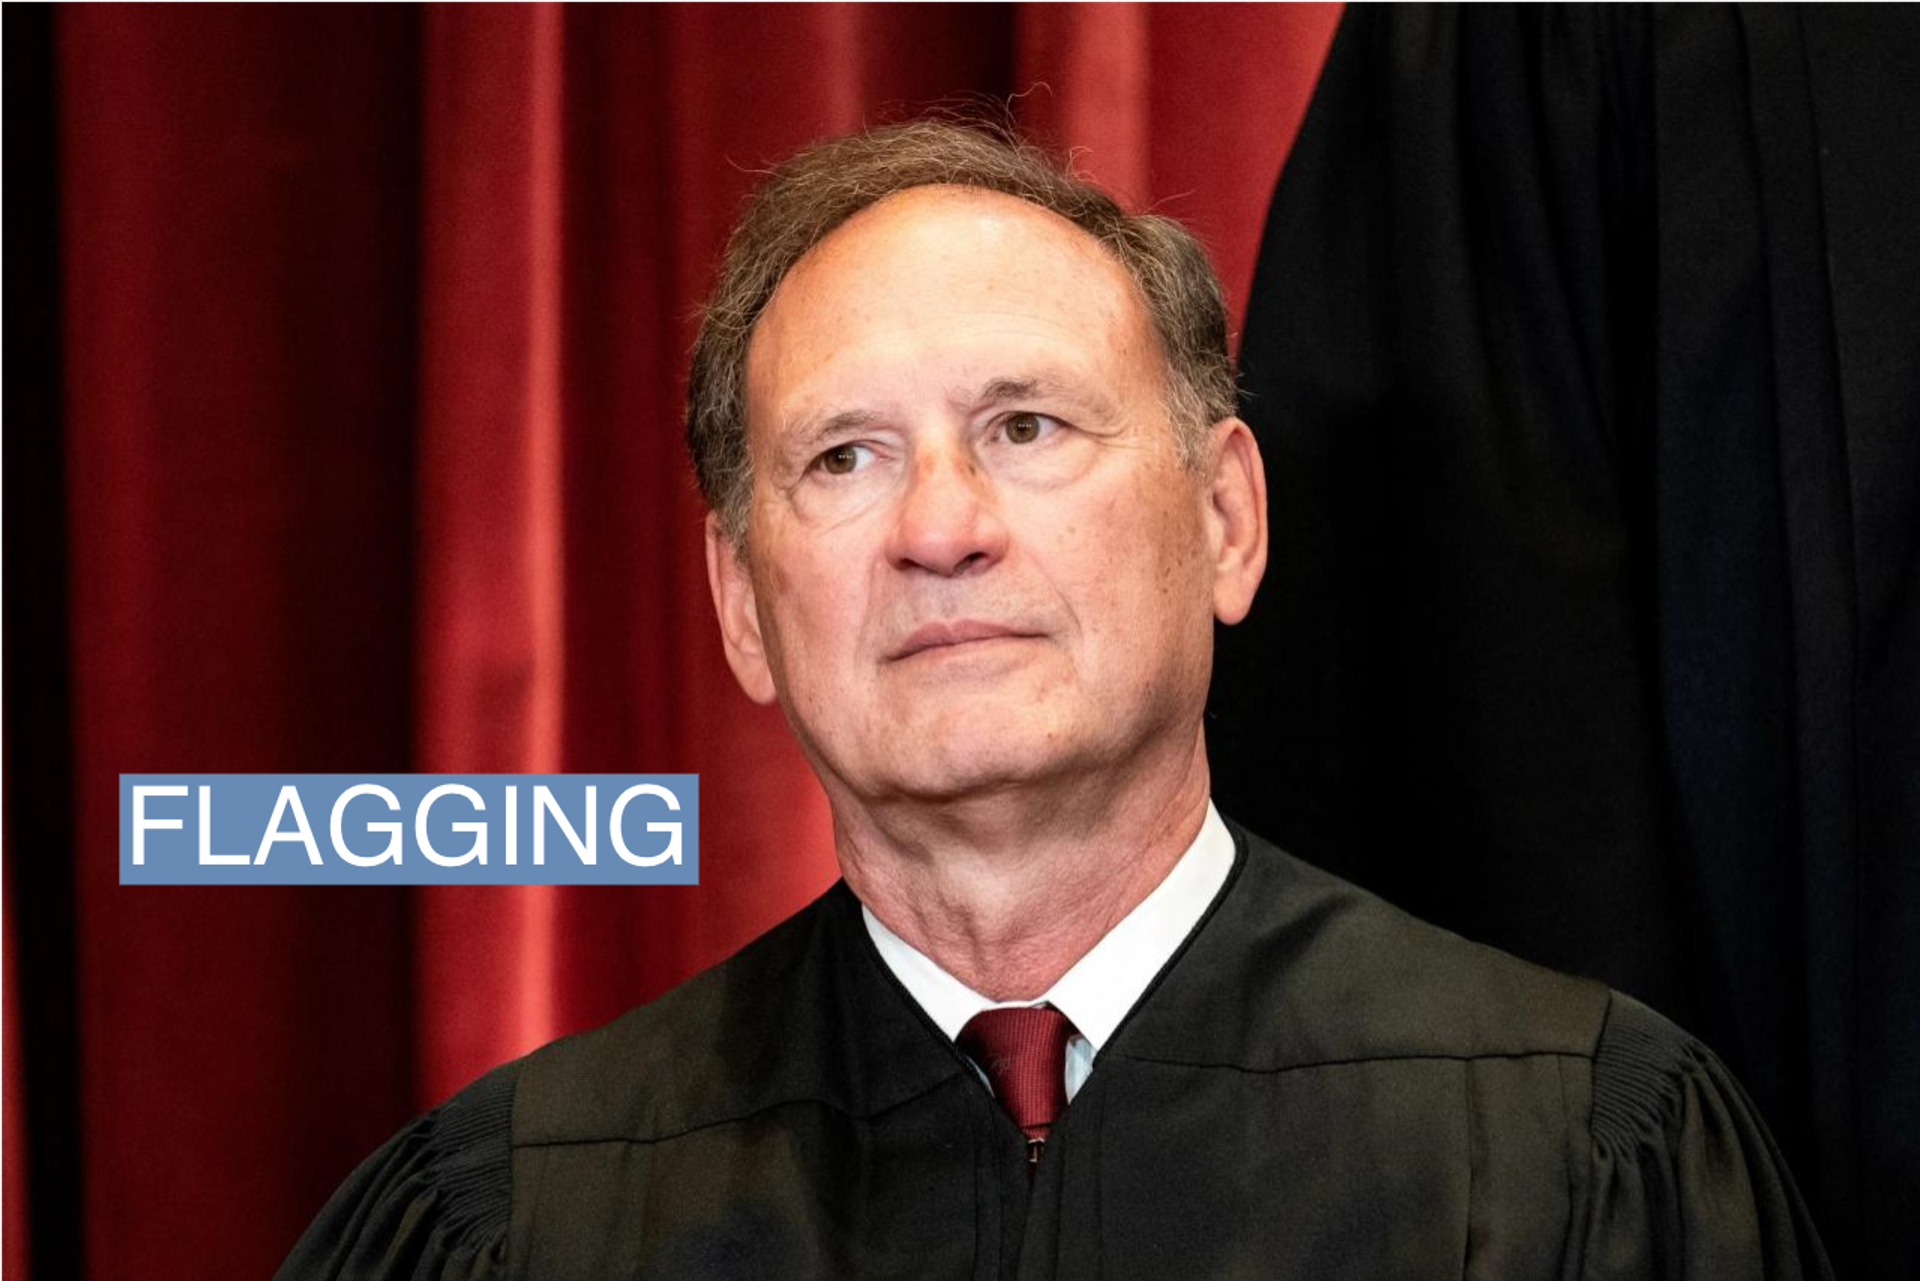  Associate Justice Samuel Alito poses during a group photo of the Justices at the Supreme Court in Washington, D.C., on April 23, 2021.